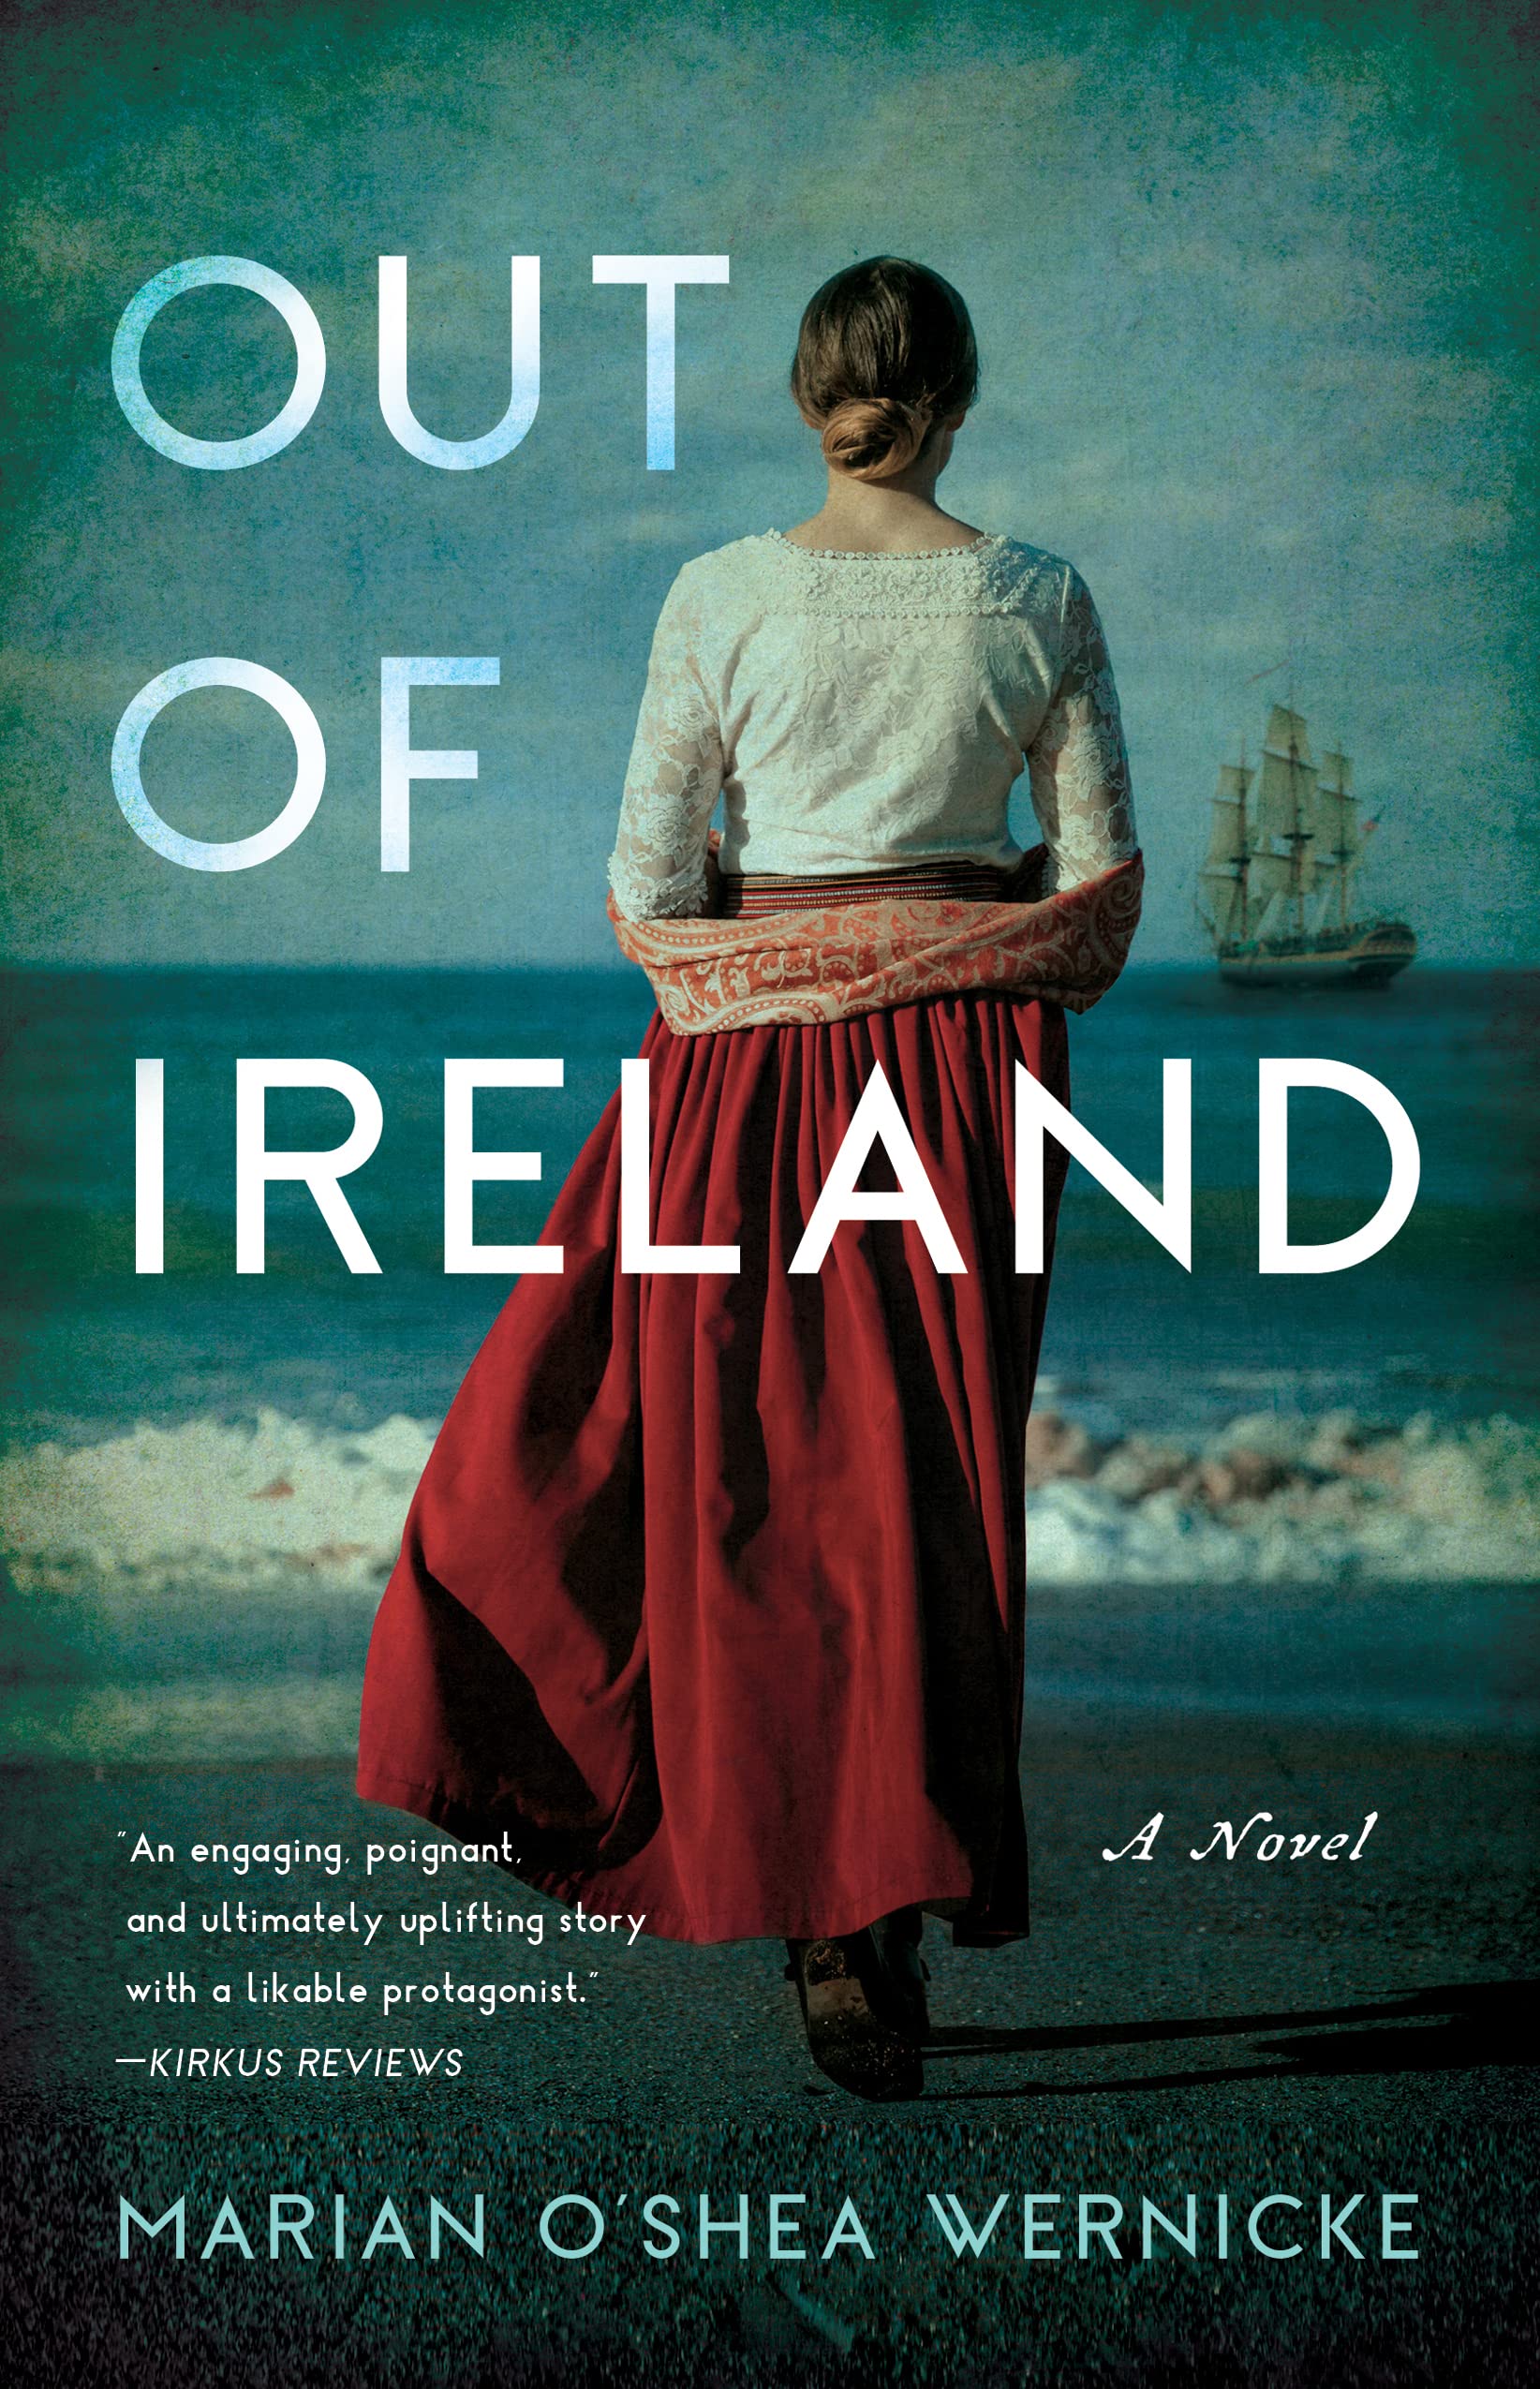 One of our recommended books is Out of Ireland by Marian O’Shea Wernicke